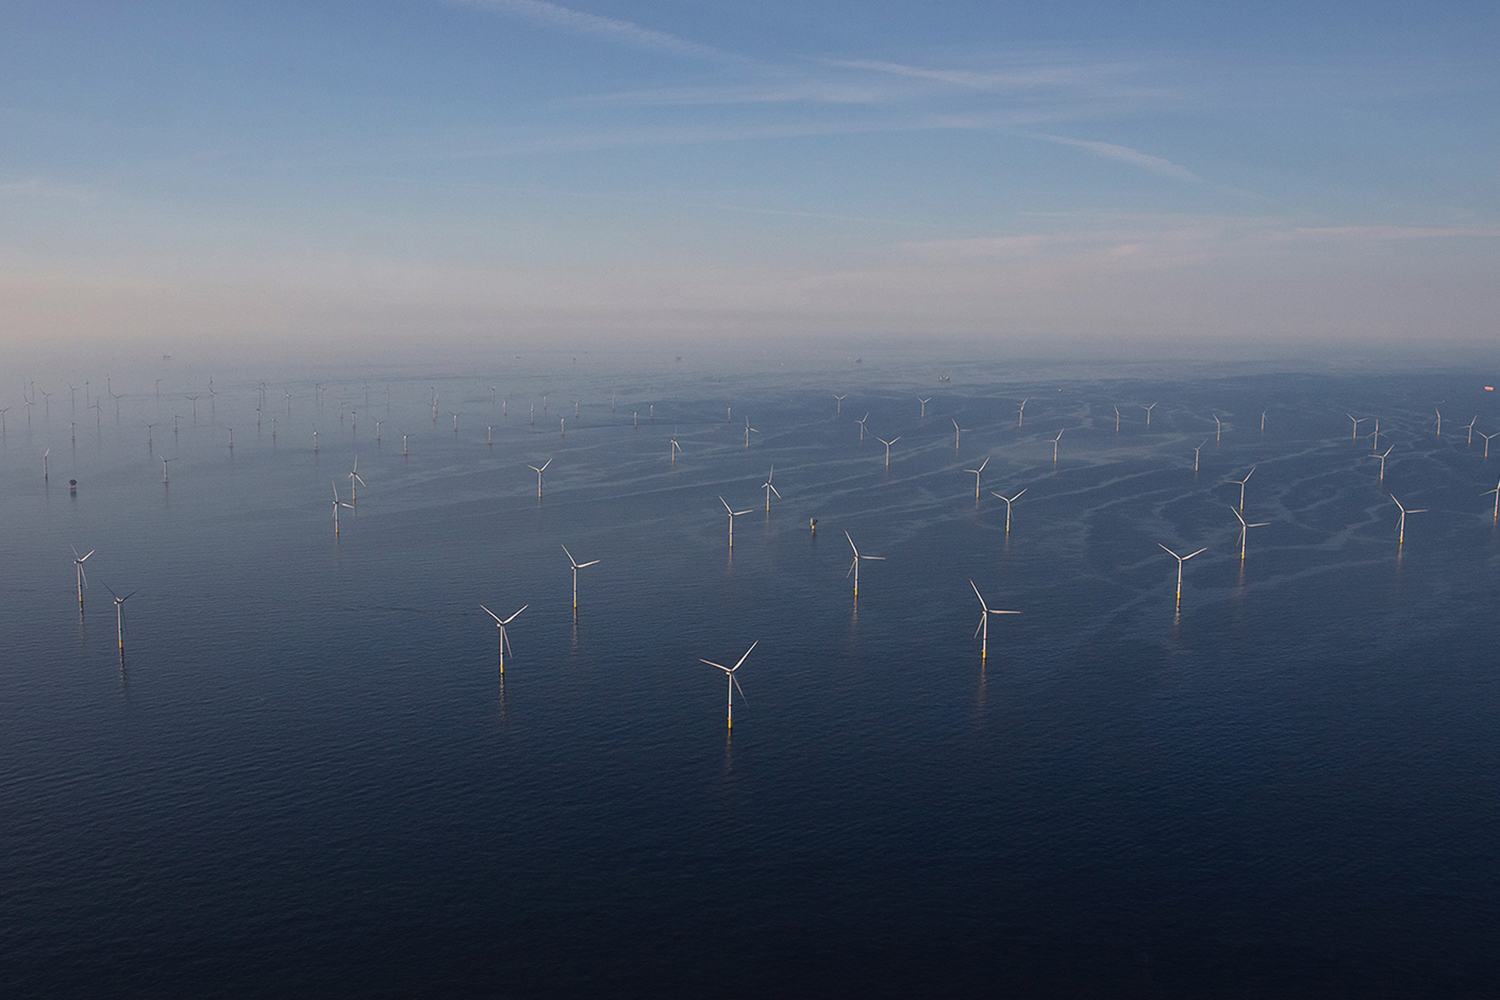 https://project-one.ineos.com/wp-content/uploads/2020/09/Norther-wind-farm-3.jpg